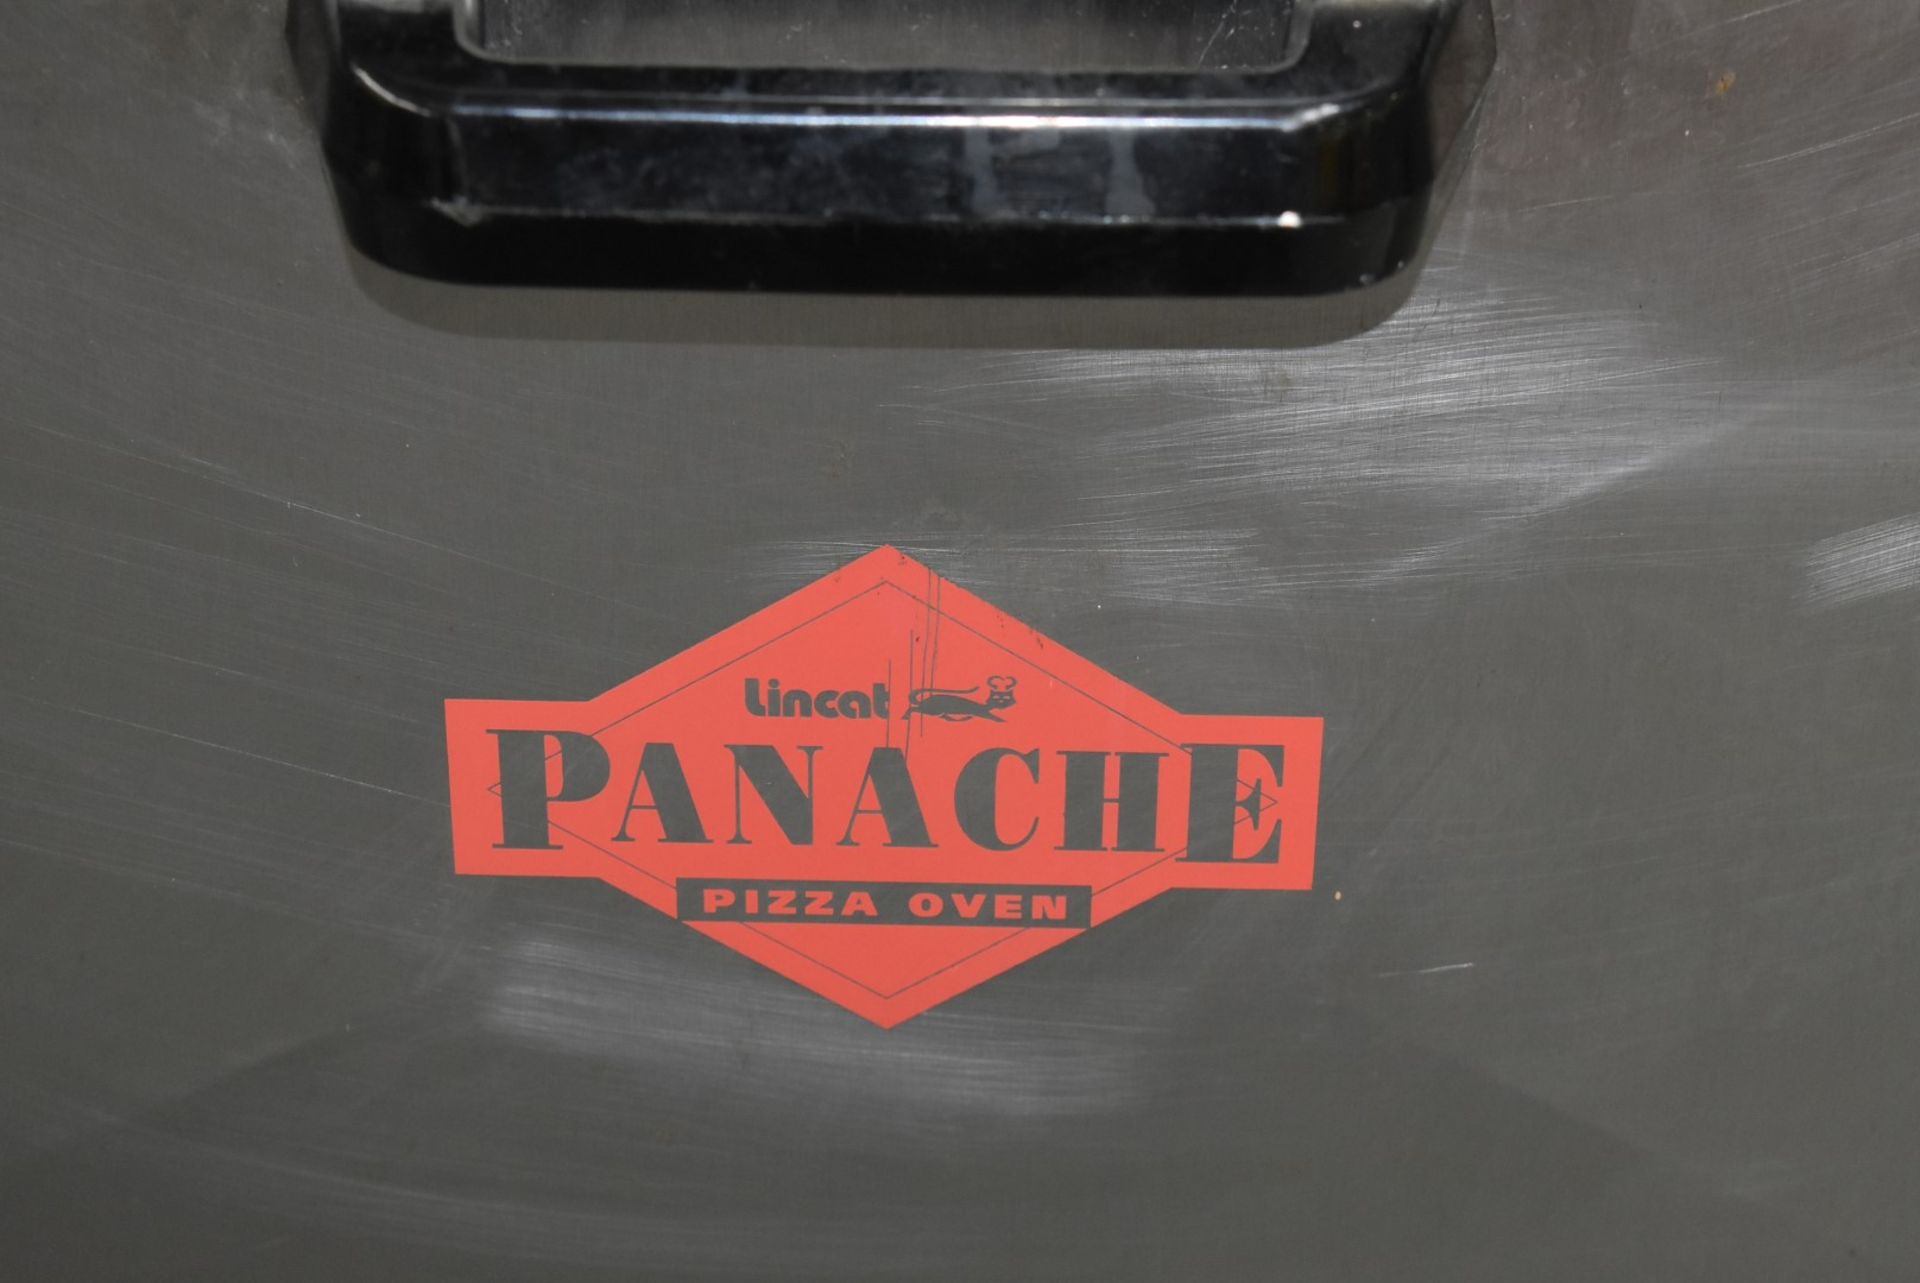 1 x Lincat Panache Commercial Pizza Oven - Stainless Steel - Includes Pizza Paddle - 230V - Image 2 of 7